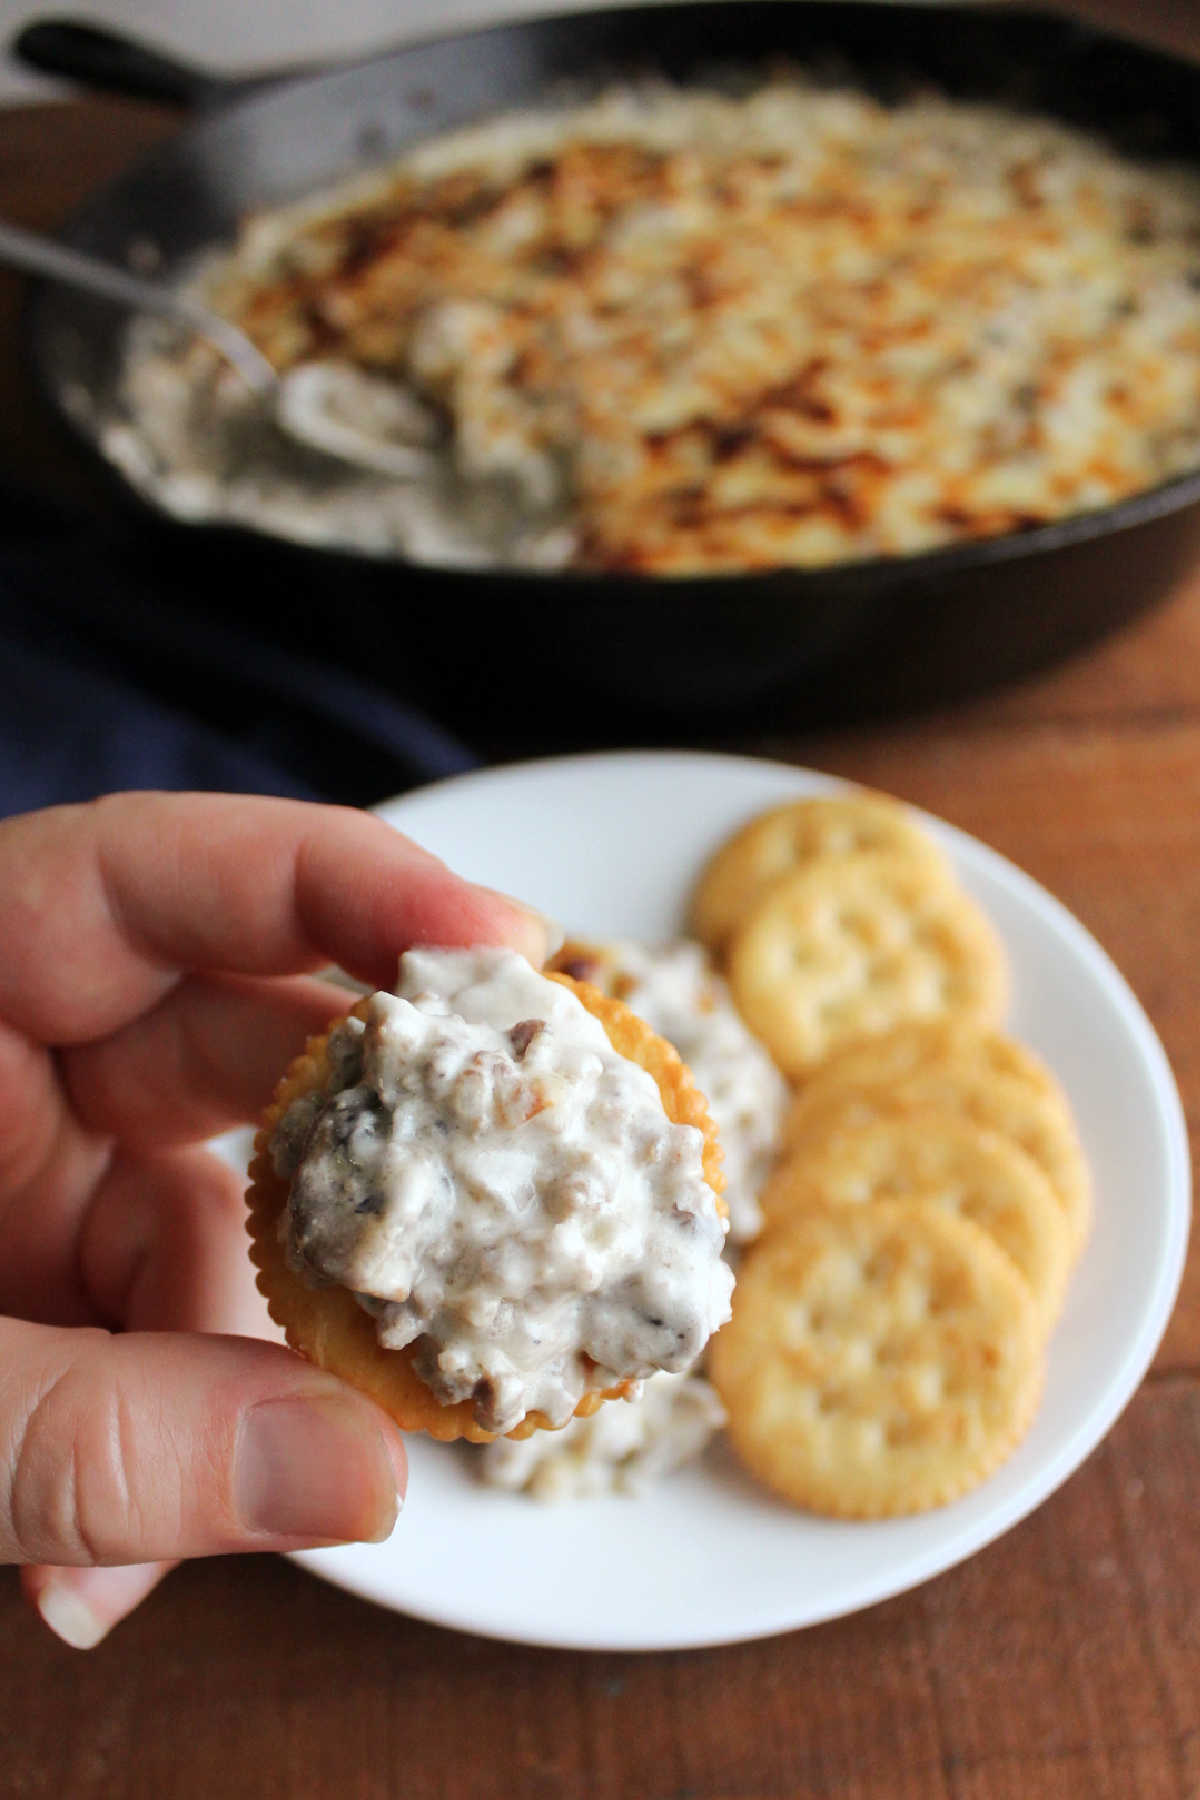 Hand holding cracker topped with cheesy dip with mushrooms and sausage.